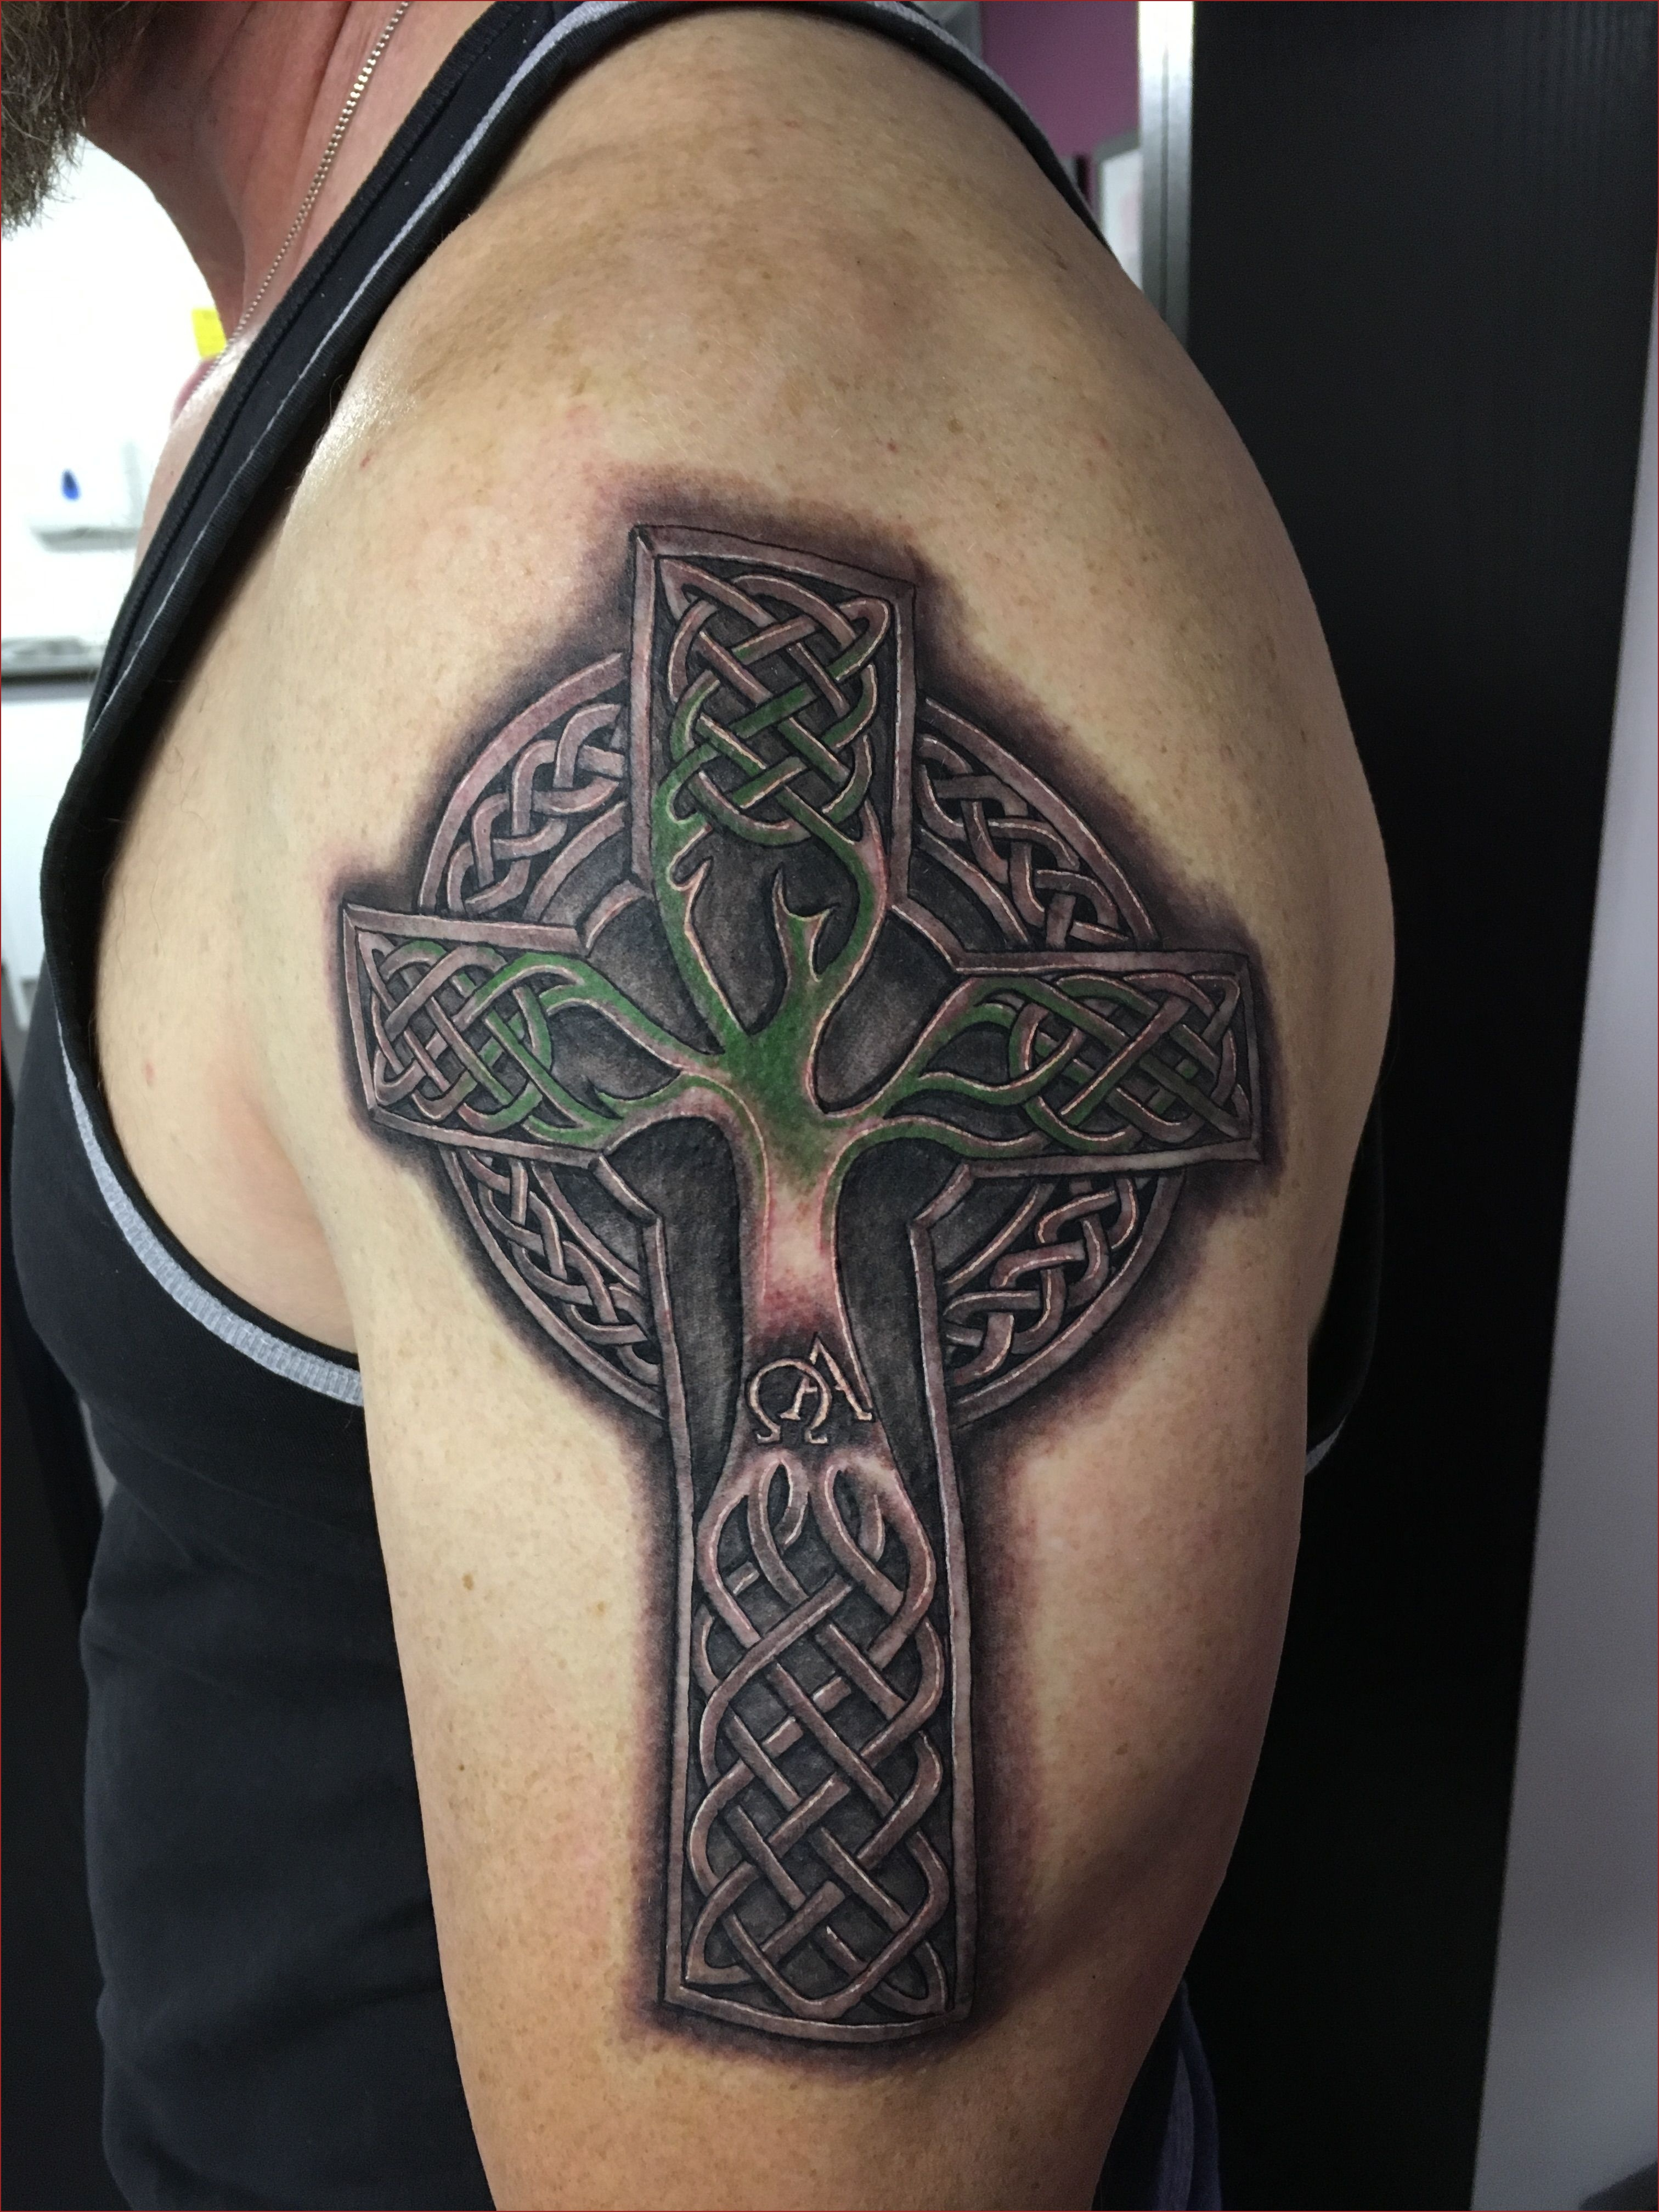 50 Best Celtic Cross Tattoo Designs And Placement Ideas Tats N pertaining to dimensions 3024 X 4032